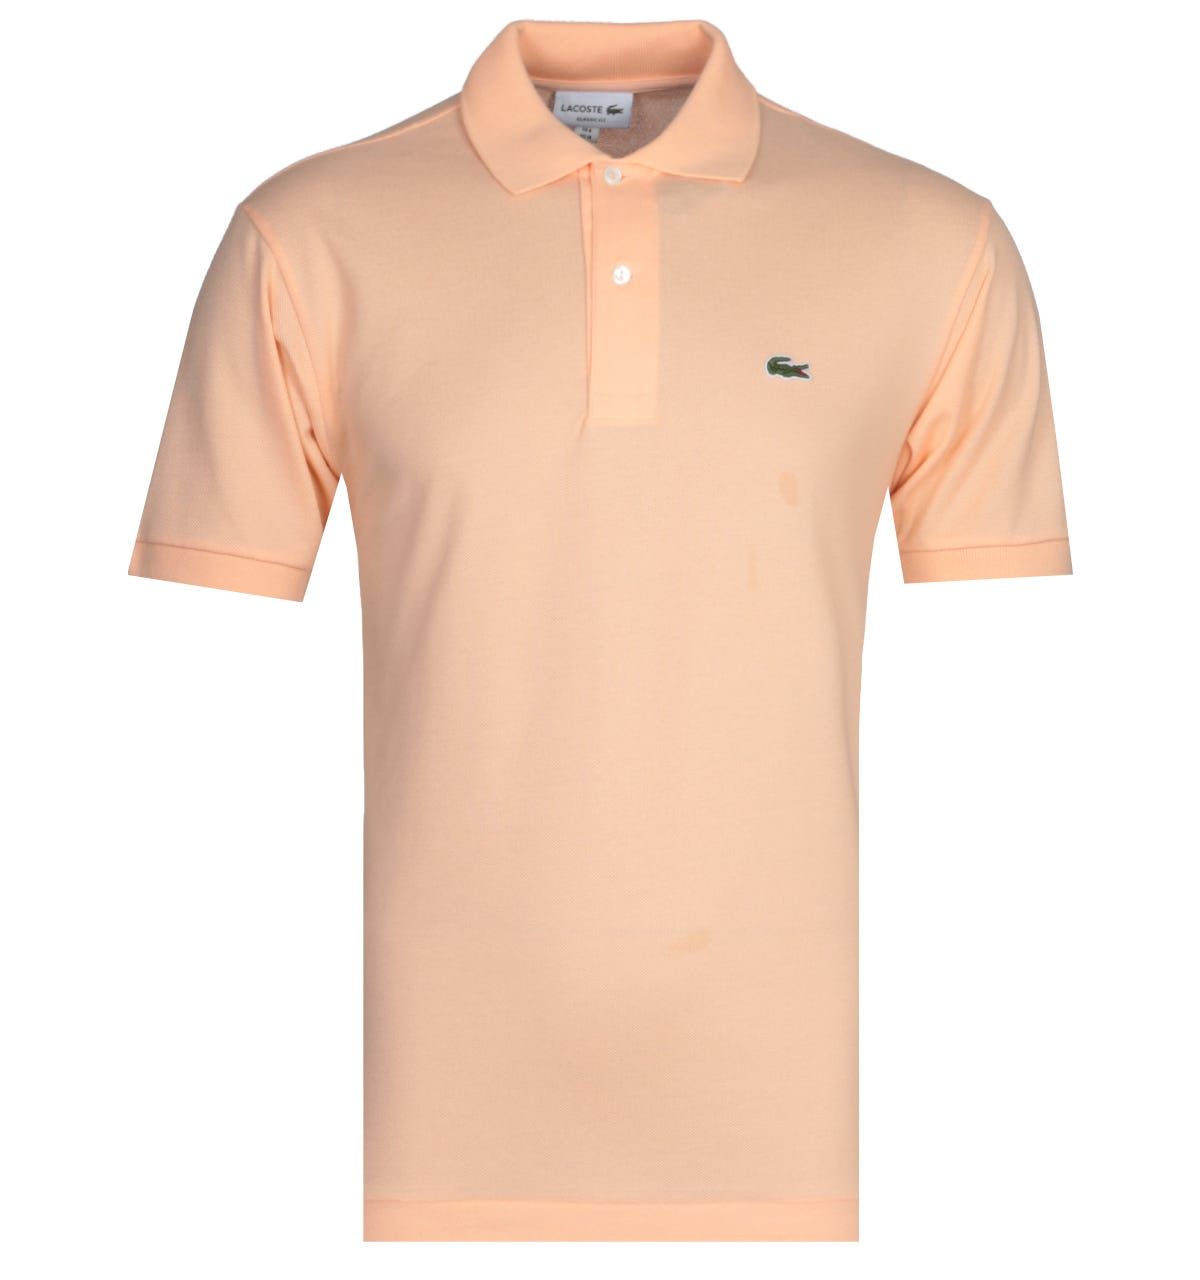 <p>A pure cotton composition crafted by Lacoste. The Lacoste Pink MC Homme Polo Shirt is fitted with a two-button placket, spread collar and ribbed trims. The design is finished with the Lacoste logo embroidered on the chest.</p><ul><li>Cotton composition</li><li>Two button placket</li><li>Tonal stitching</li><li>Ribbed trims</li><li>Lacoste logo embroidered on chest</li></ul><p>Style & Fit:</p><ul><li>Regular fit</li><li>Fits true to size</li></ul><p>Fabric Composition & Care:</p><ul><li>100% Cotton</li><li>Machine washable</li></ul>